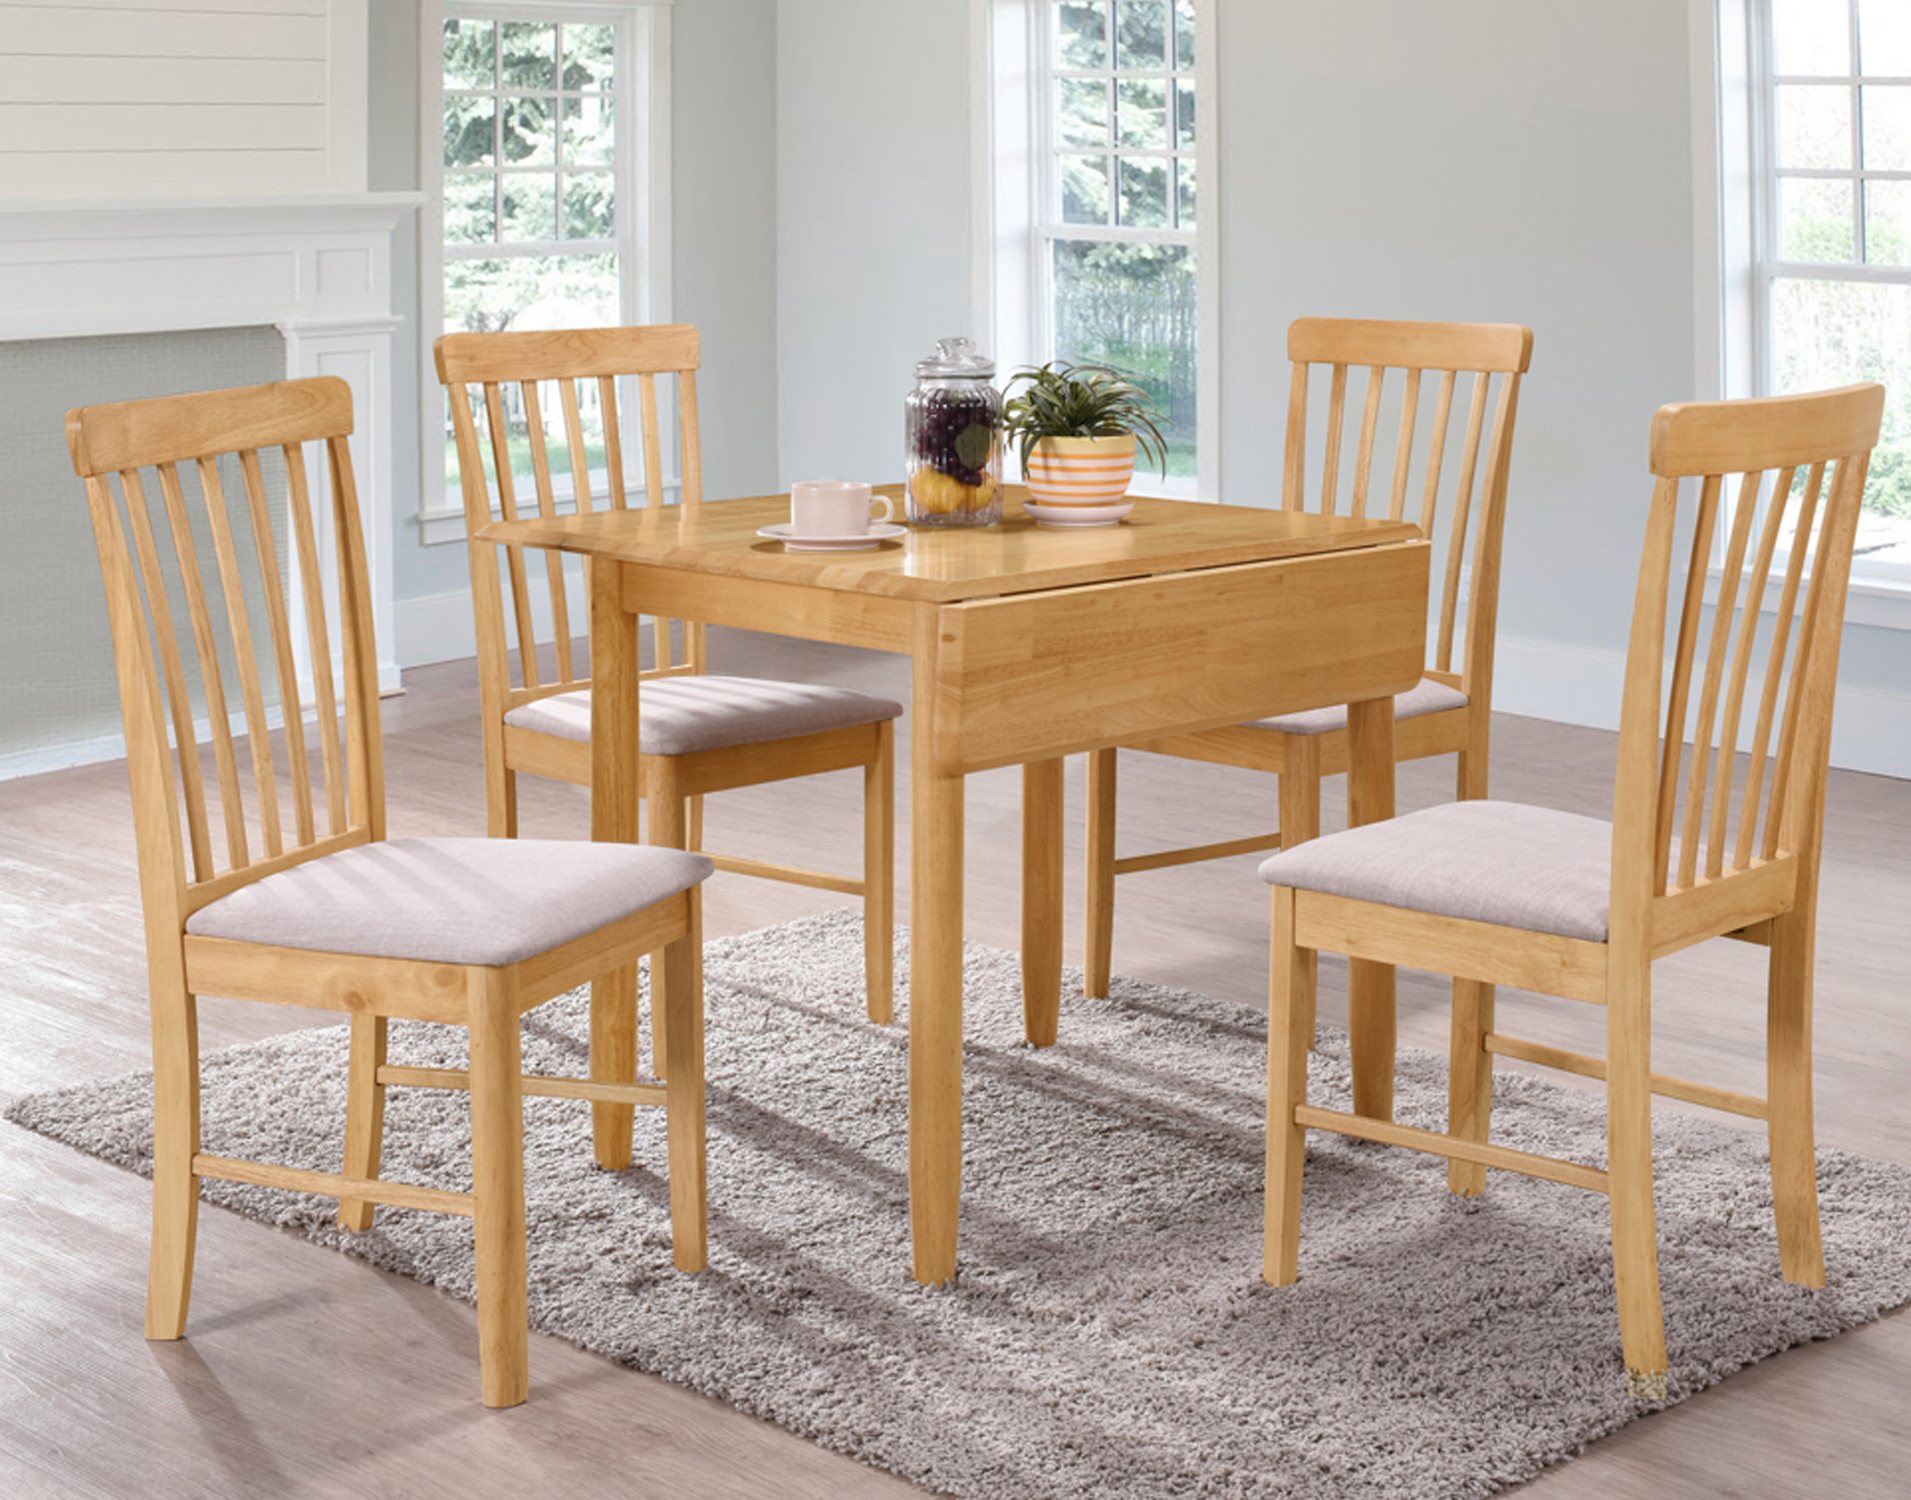 Small oak dining table and 2 chairs